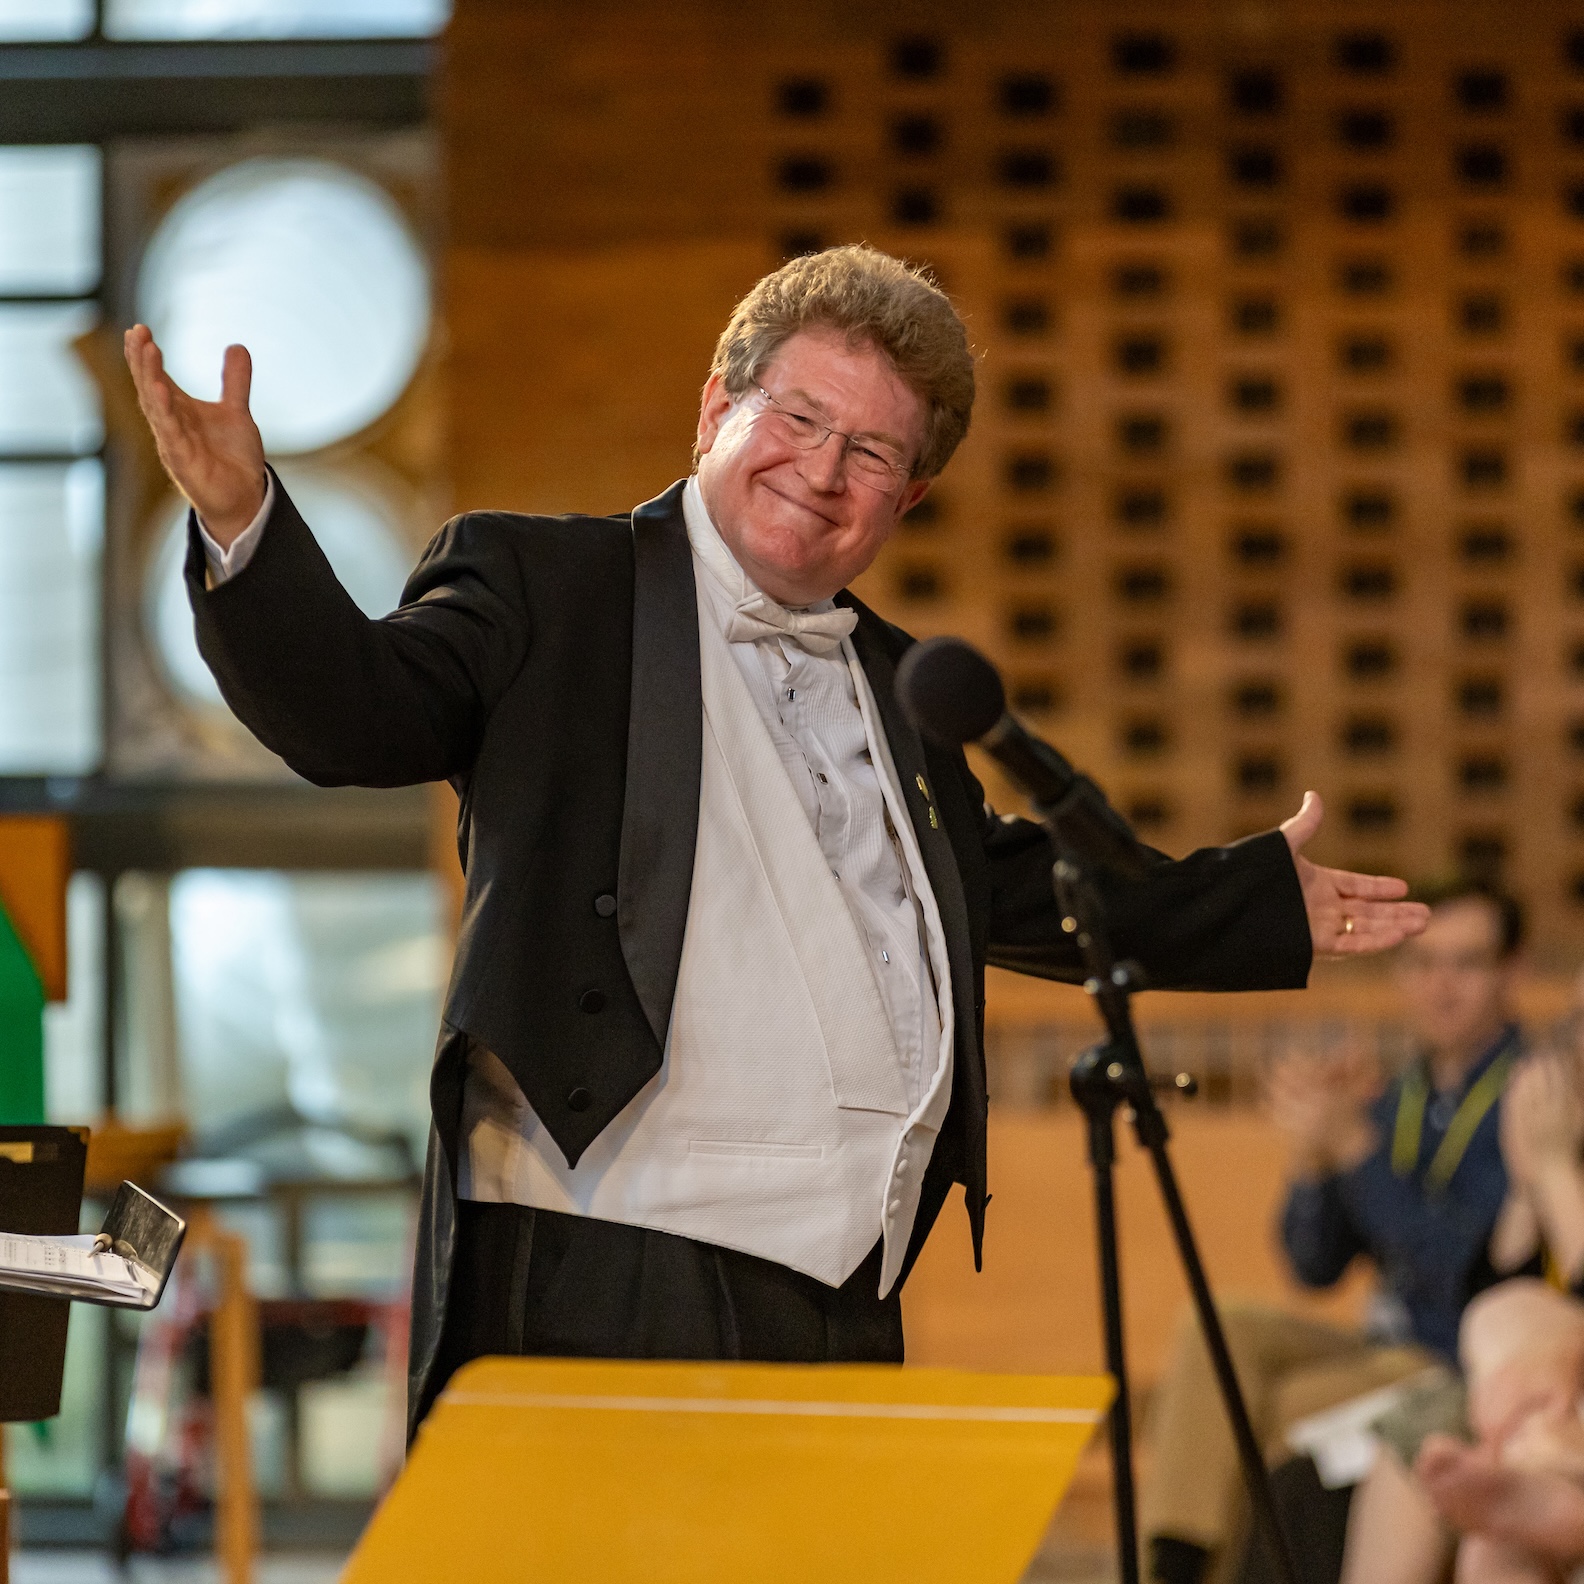 Professor of Music and Music Education Jeffrey Doebler ’87, Ph.D., conducting during a Lutheran Summer Music performance in the Chapel of the Resurrection.